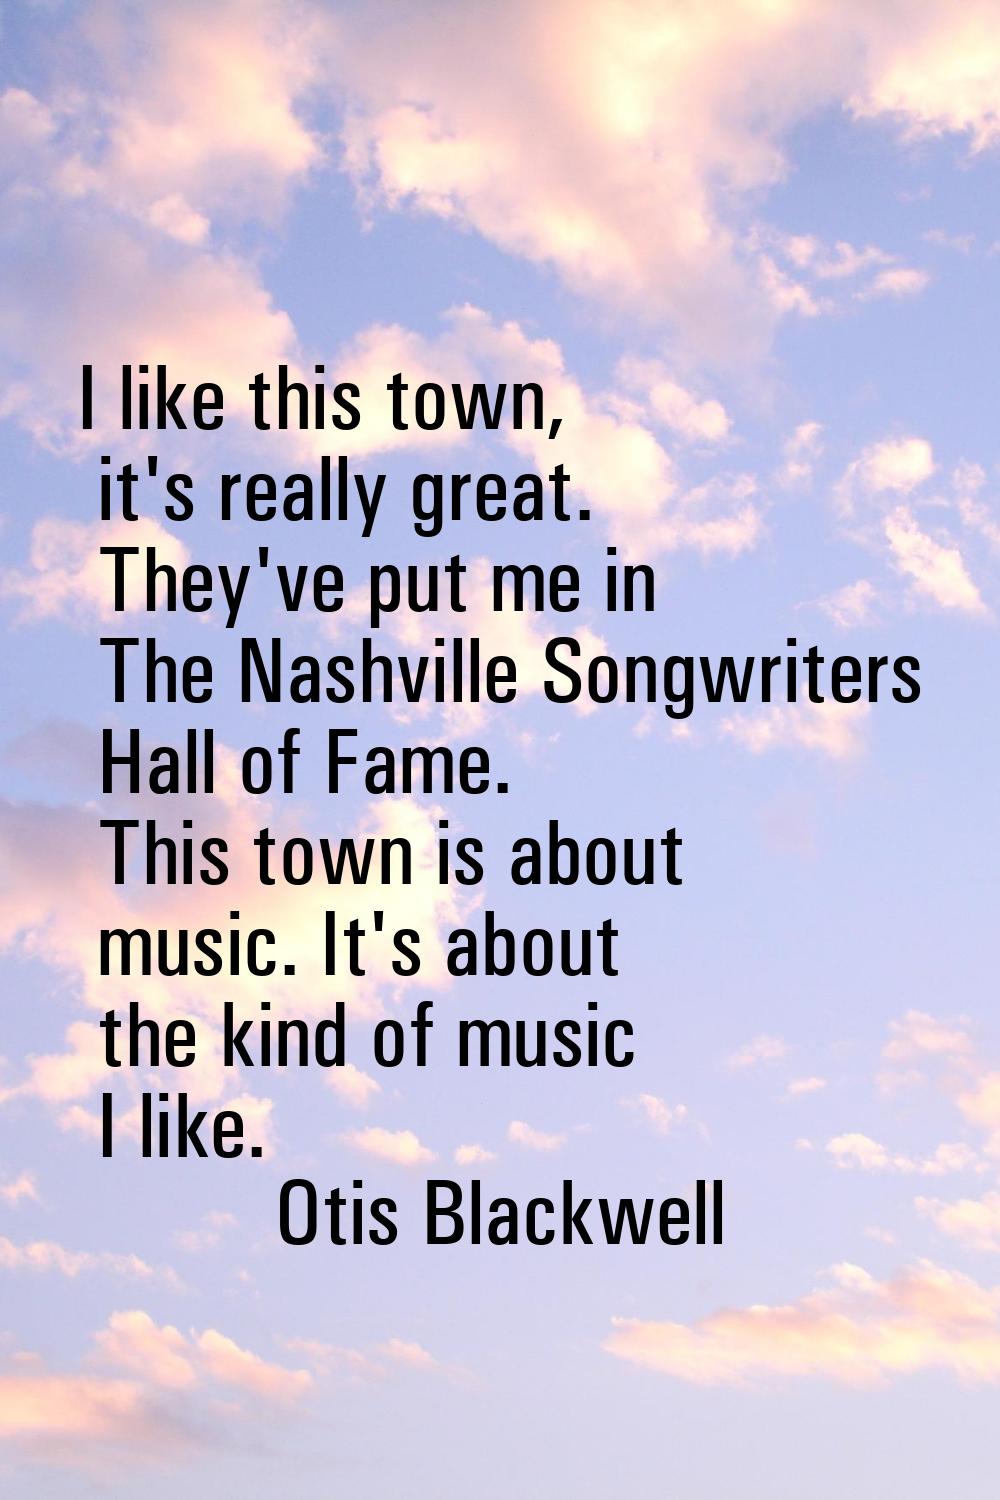 I like this town, it's really great. They've put me in The Nashville Songwriters Hall of Fame. This